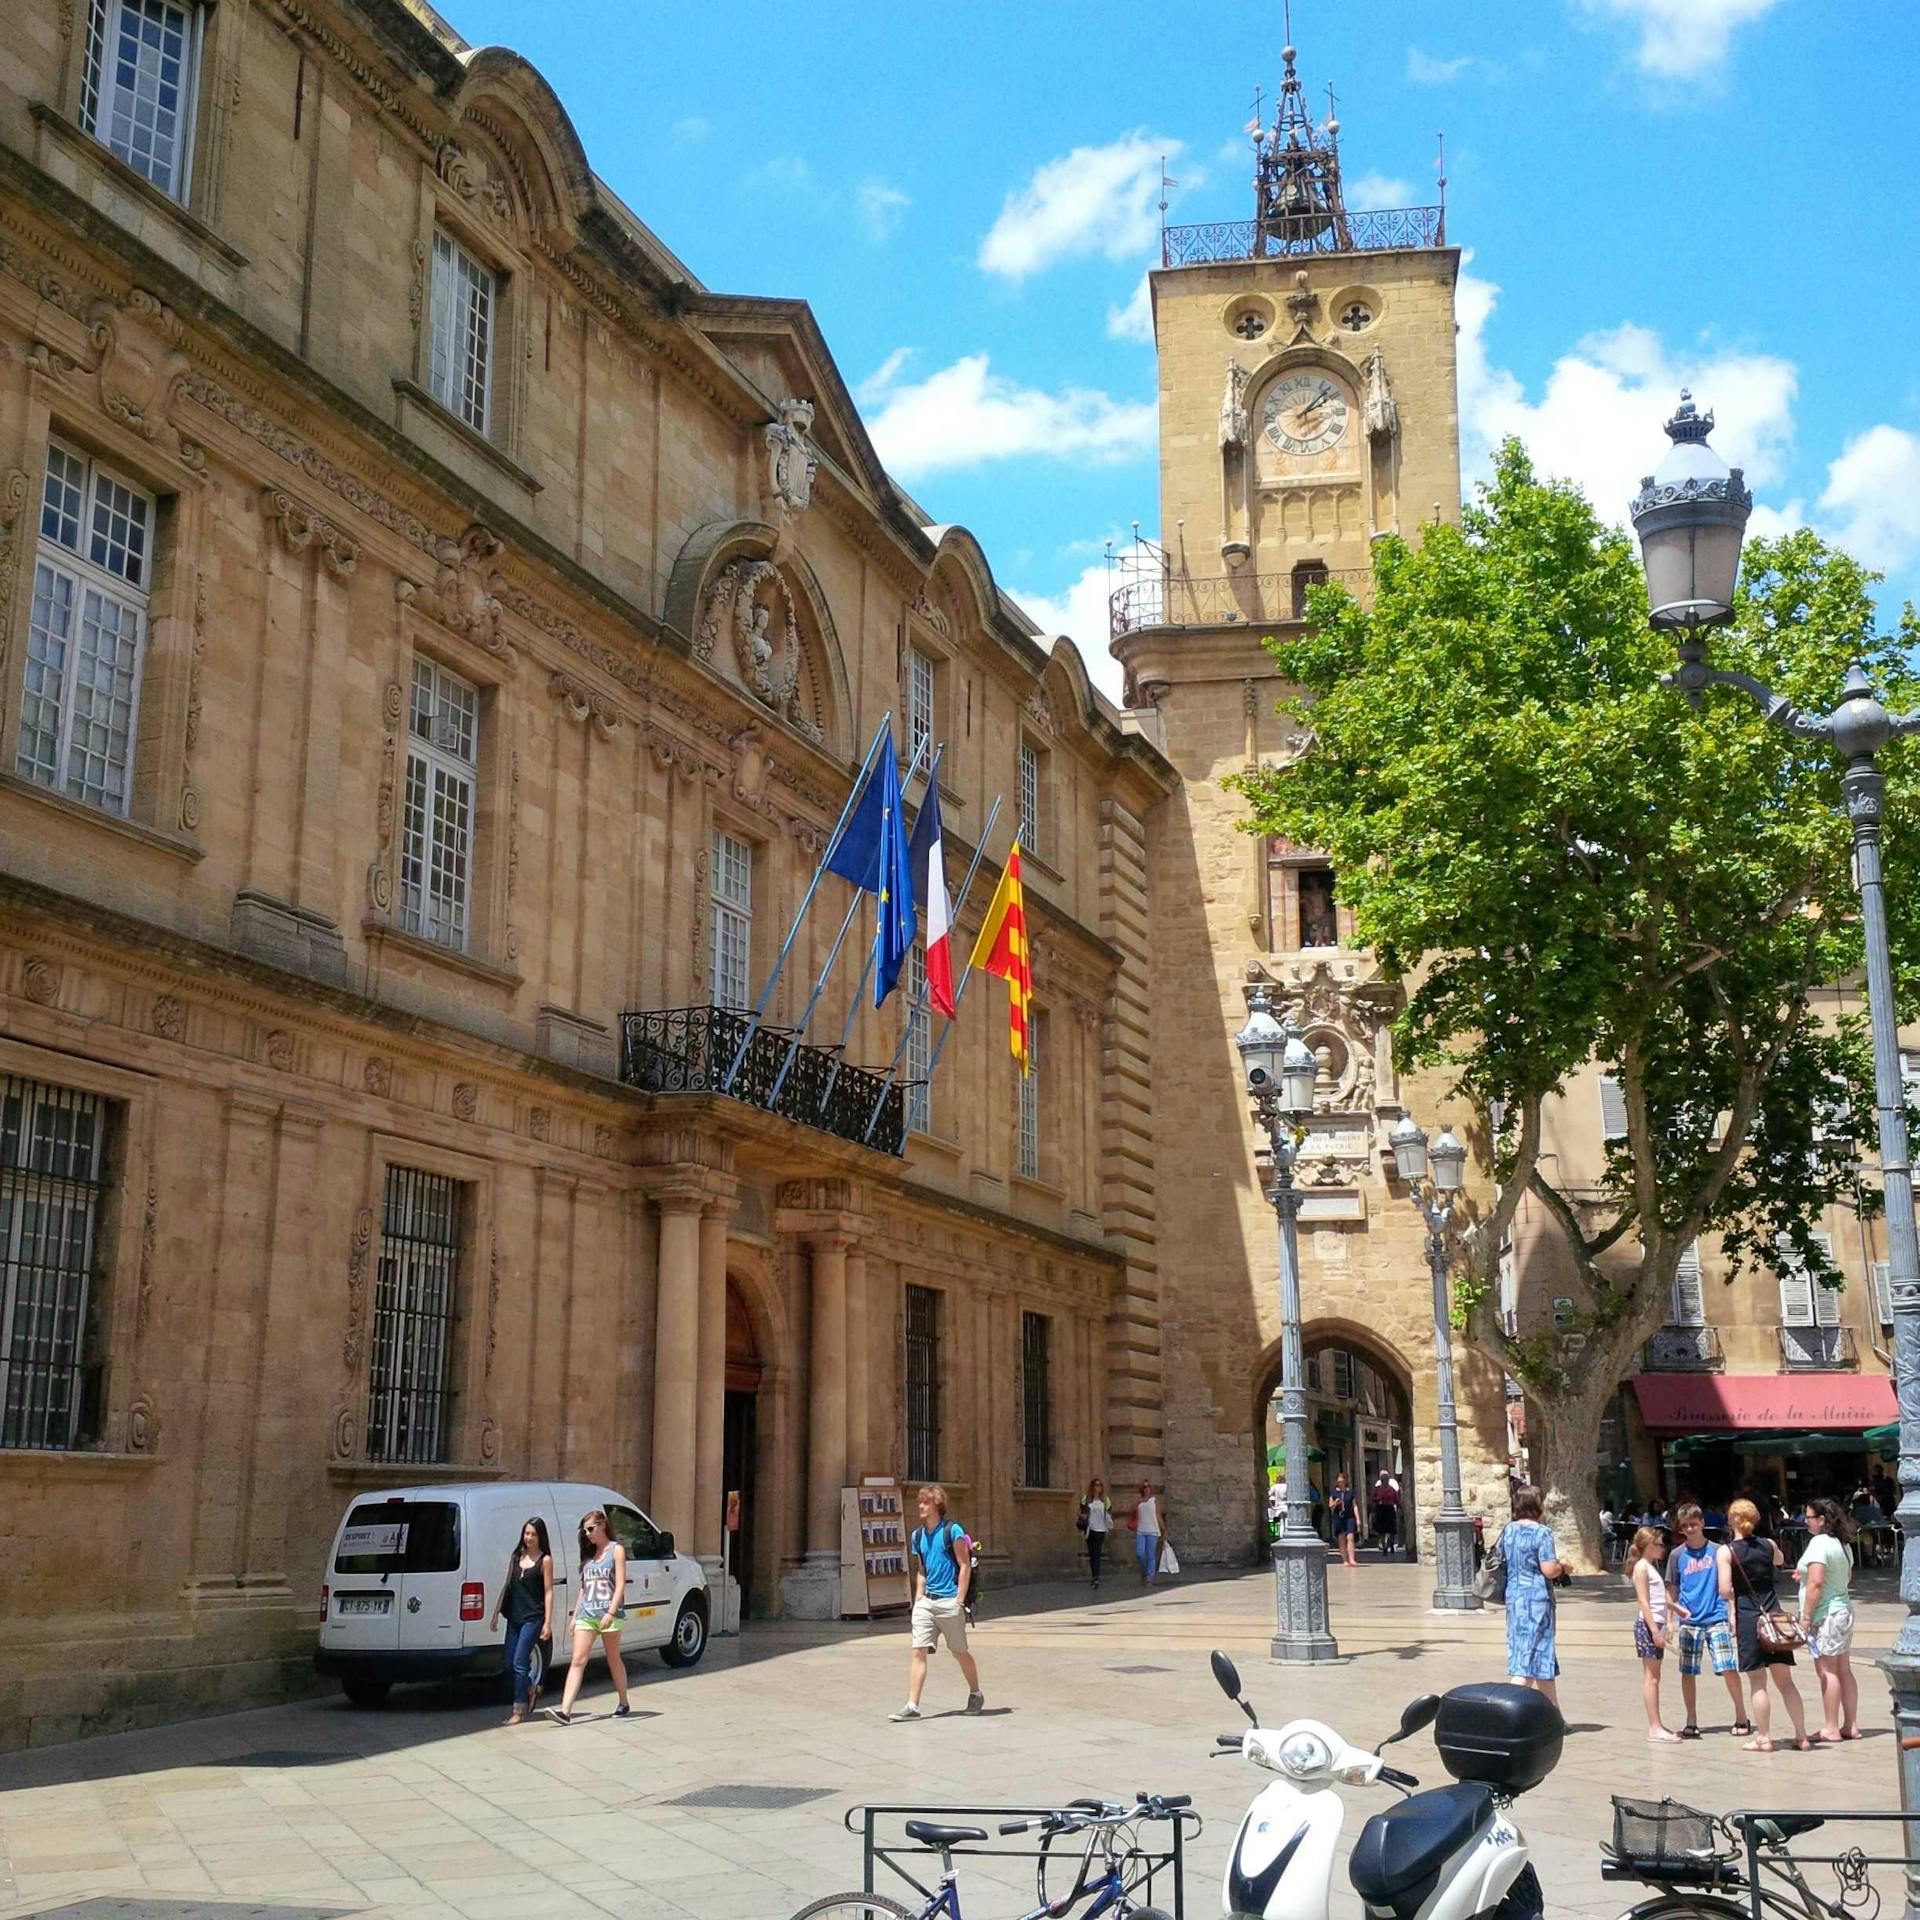 <p>Aix-en-Provence City Hall, also known as Hôtel de Ville, is a historic building located in the heart of the city. It was built in the 17th century, and has a rich architectural and artistic heritage. </p><p><br></p><p><u>Here are some of the main features of the City Hall:</u></p><p><br></p><p>The façade, inspired by Italian palaces, was designed by Pierre Pavillon, a local architect, with the assistance of the sculptors Jean-Claude Rambot and Jean-Baptiste Fossé. The façade has statues of angels, and busts of counts of Provence and King Louis XIV, although some of them were damaged or destroyed during the French Revolution.</p><p><br></p><p>The entrance is framed by two double Doric columns linked by an entablature which support a fine wrought-iron balcony dating from 1661. Each leaf of the wooden door is decorated with a lion’s head knocker designed by Pierre Pavillon. This door leads to the square inner courtyard, where there is a fountain and a porch supporting a state balcony.</p><p><br></p><p>The twin winding staircases lead to the magnificent Salle des Etats de Provence (House of Representatives), where the provincial parliament used to meet. The original decoration of the hall, dating from the 18th century, was destroyed in 17921. The present paintings illustrating the history of the city and of Provence were done between 1899 and 1905 by Henri Martin, Paul Gervais, and Edouard Detaille.</p><p><br></p><p>The City Hall also houses the Musée du Vieil Aix (Museum of Old Aix), which displays collections of furniture, ceramics, costumes, and paintings related to the history and culture of Aix-en-Provence.</p><p><br></p>